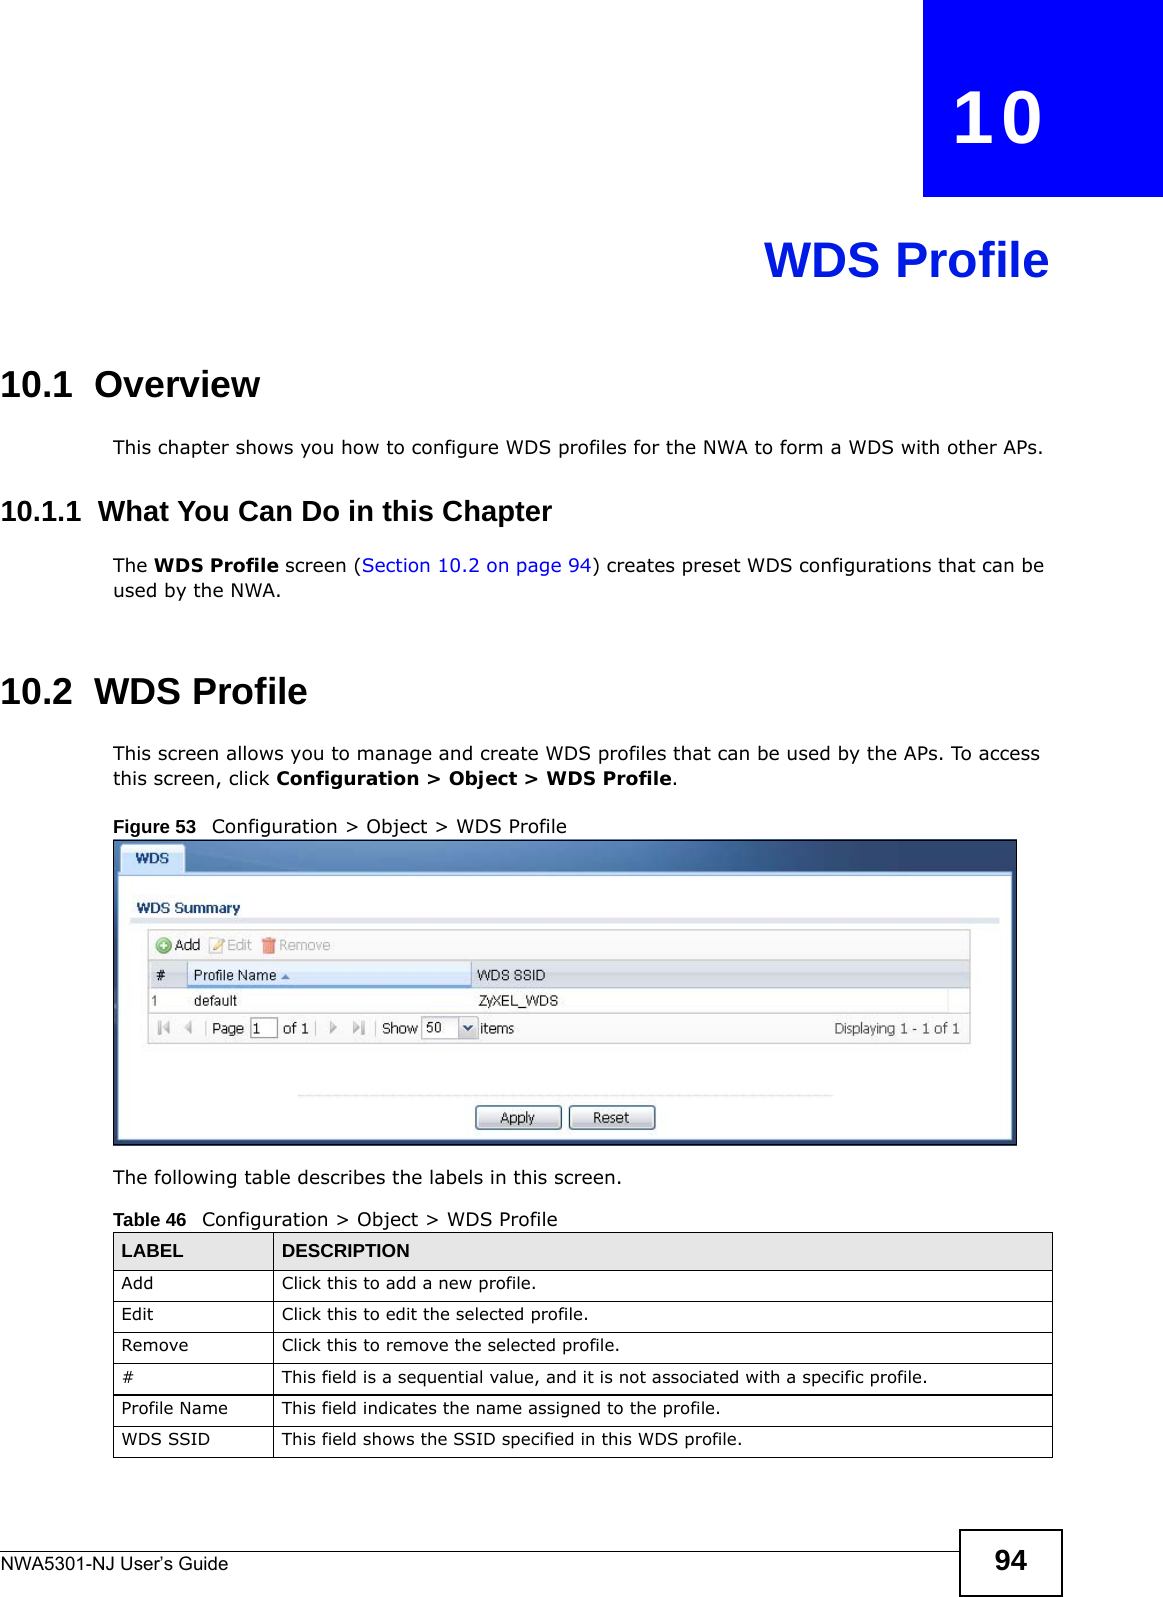 NWA5301-NJ User’s Guide 94CHAPTER   10WDS Profile10.1  OverviewThis chapter shows you how to configure WDS profiles for the NWA to form a WDS with other APs.10.1.1  What You Can Do in this ChapterThe WDS Profile screen (Section 10.2 on page 94) creates preset WDS configurations that can be used by the NWA.10.2  WDS Profile This screen allows you to manage and create WDS profiles that can be used by the APs. To access this screen, click Configuration &gt; Object &gt; WDS Profile.Figure 53   Configuration &gt; Object &gt; WDS ProfileThe following table describes the labels in this screen.  Table 46   Configuration &gt; Object &gt; WDS ProfileLABEL DESCRIPTIONAdd Click this to add a new profile.Edit Click this to edit the selected profile.Remove Click this to remove the selected profile.# This field is a sequential value, and it is not associated with a specific profile.Profile Name This field indicates the name assigned to the profile.WDS SSID This field shows the SSID specified in this WDS profile.